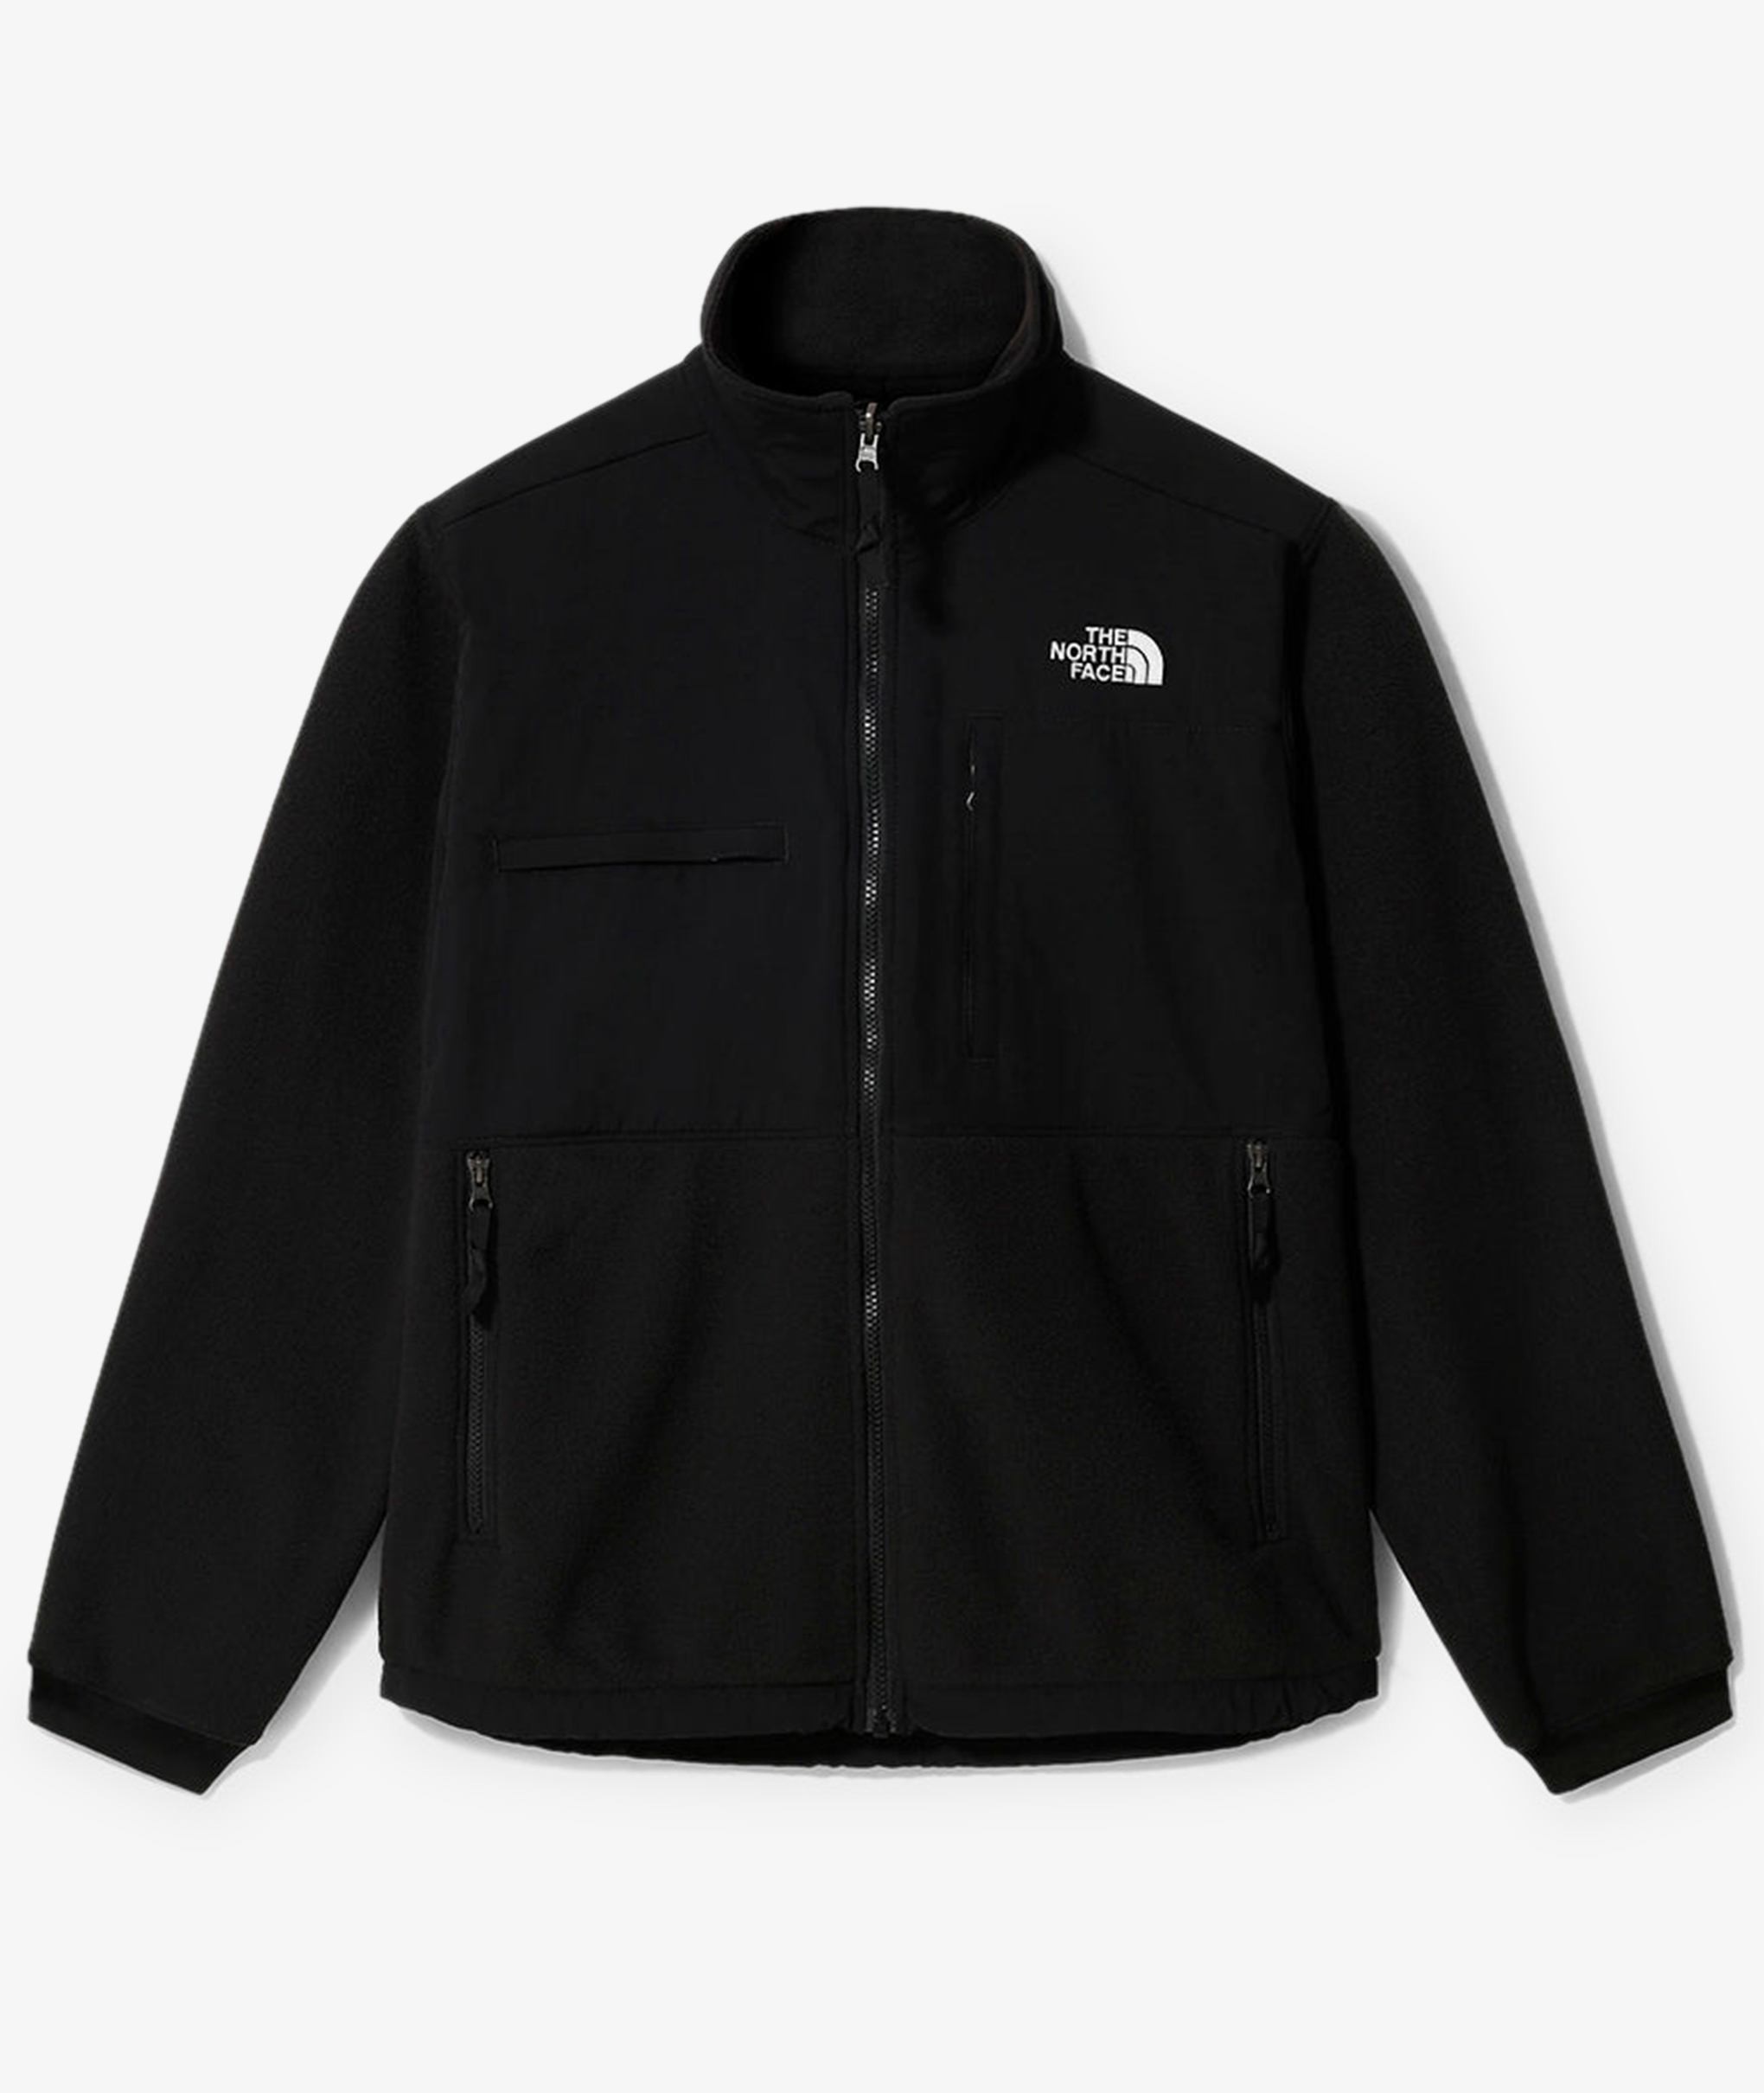 Norse Store | Shipping Worldwide - The North Face Denali Jacket - TNF Black